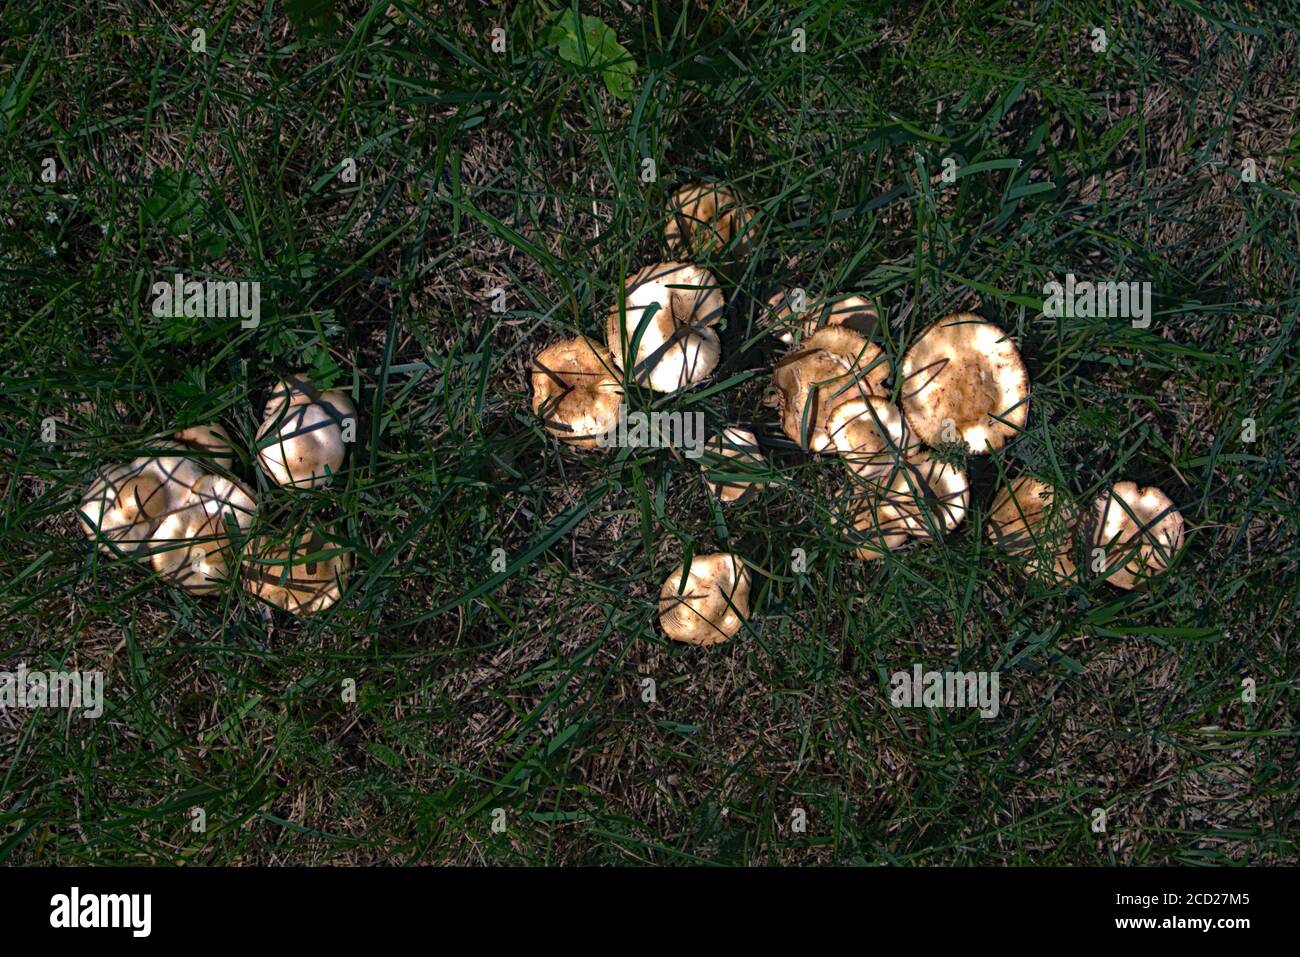 An entire group of poisonous mushrooms rowing in rural grasslands Stock Photo